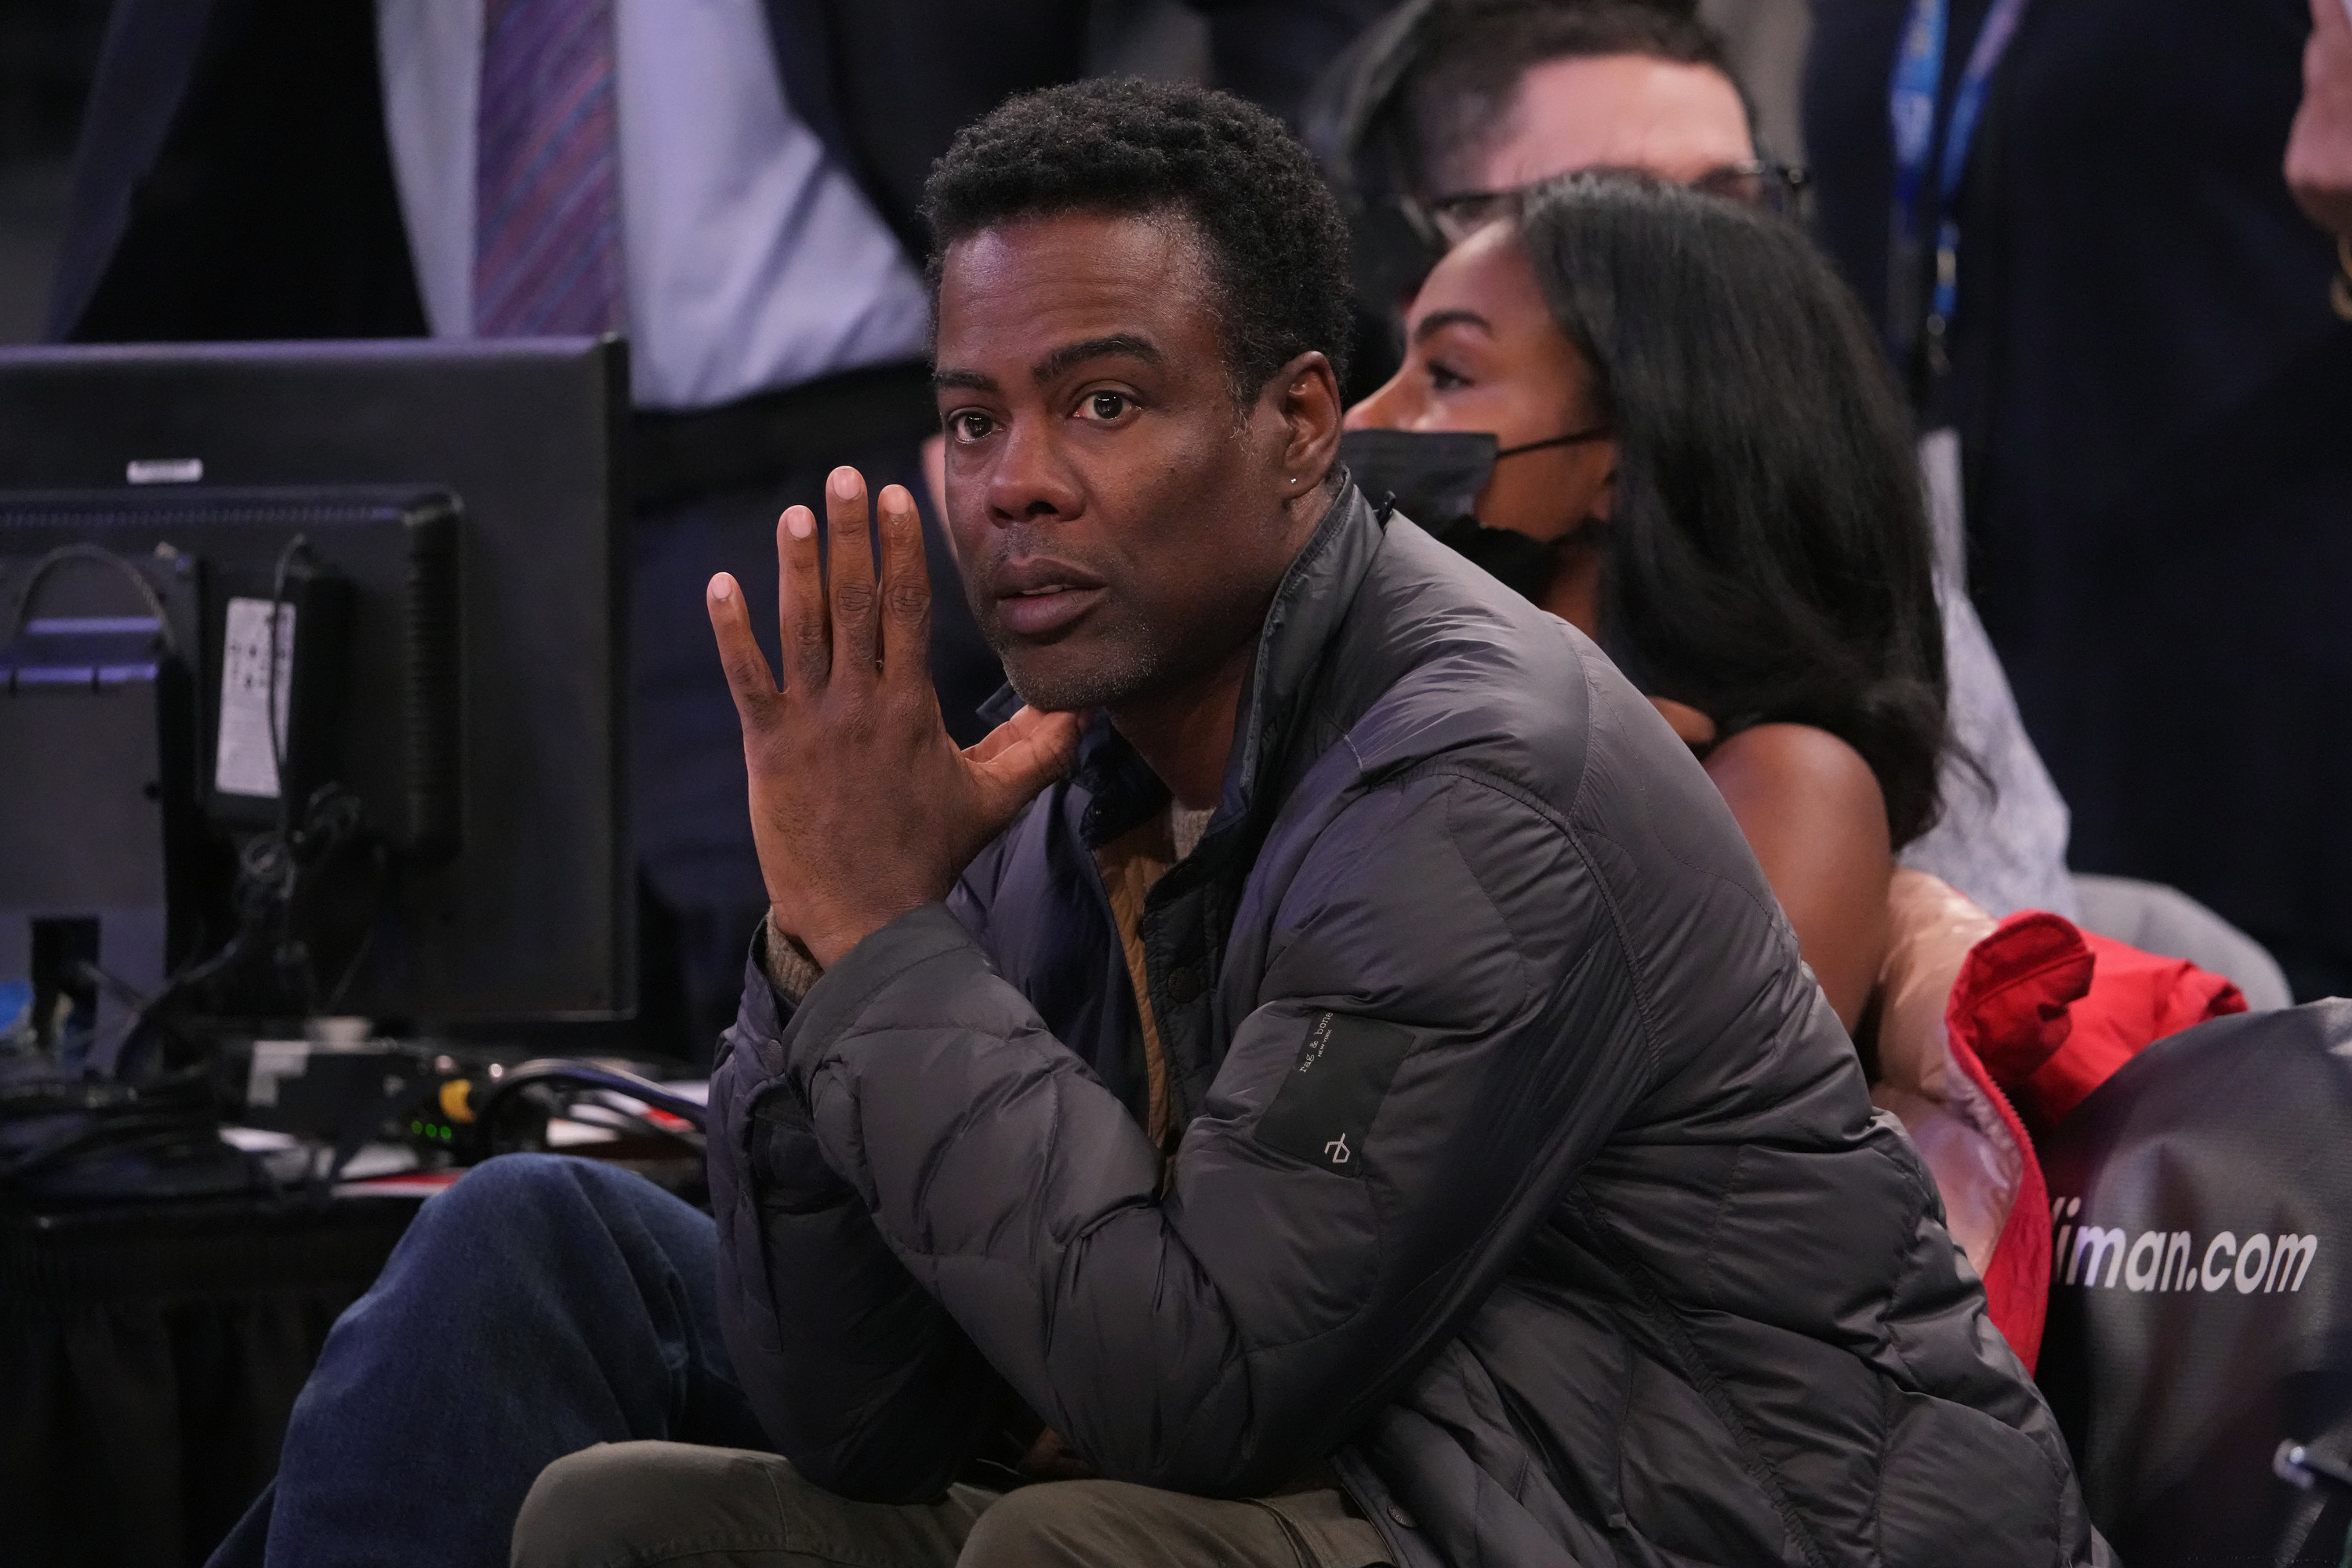 Chris sits courtside with his hands pressed together